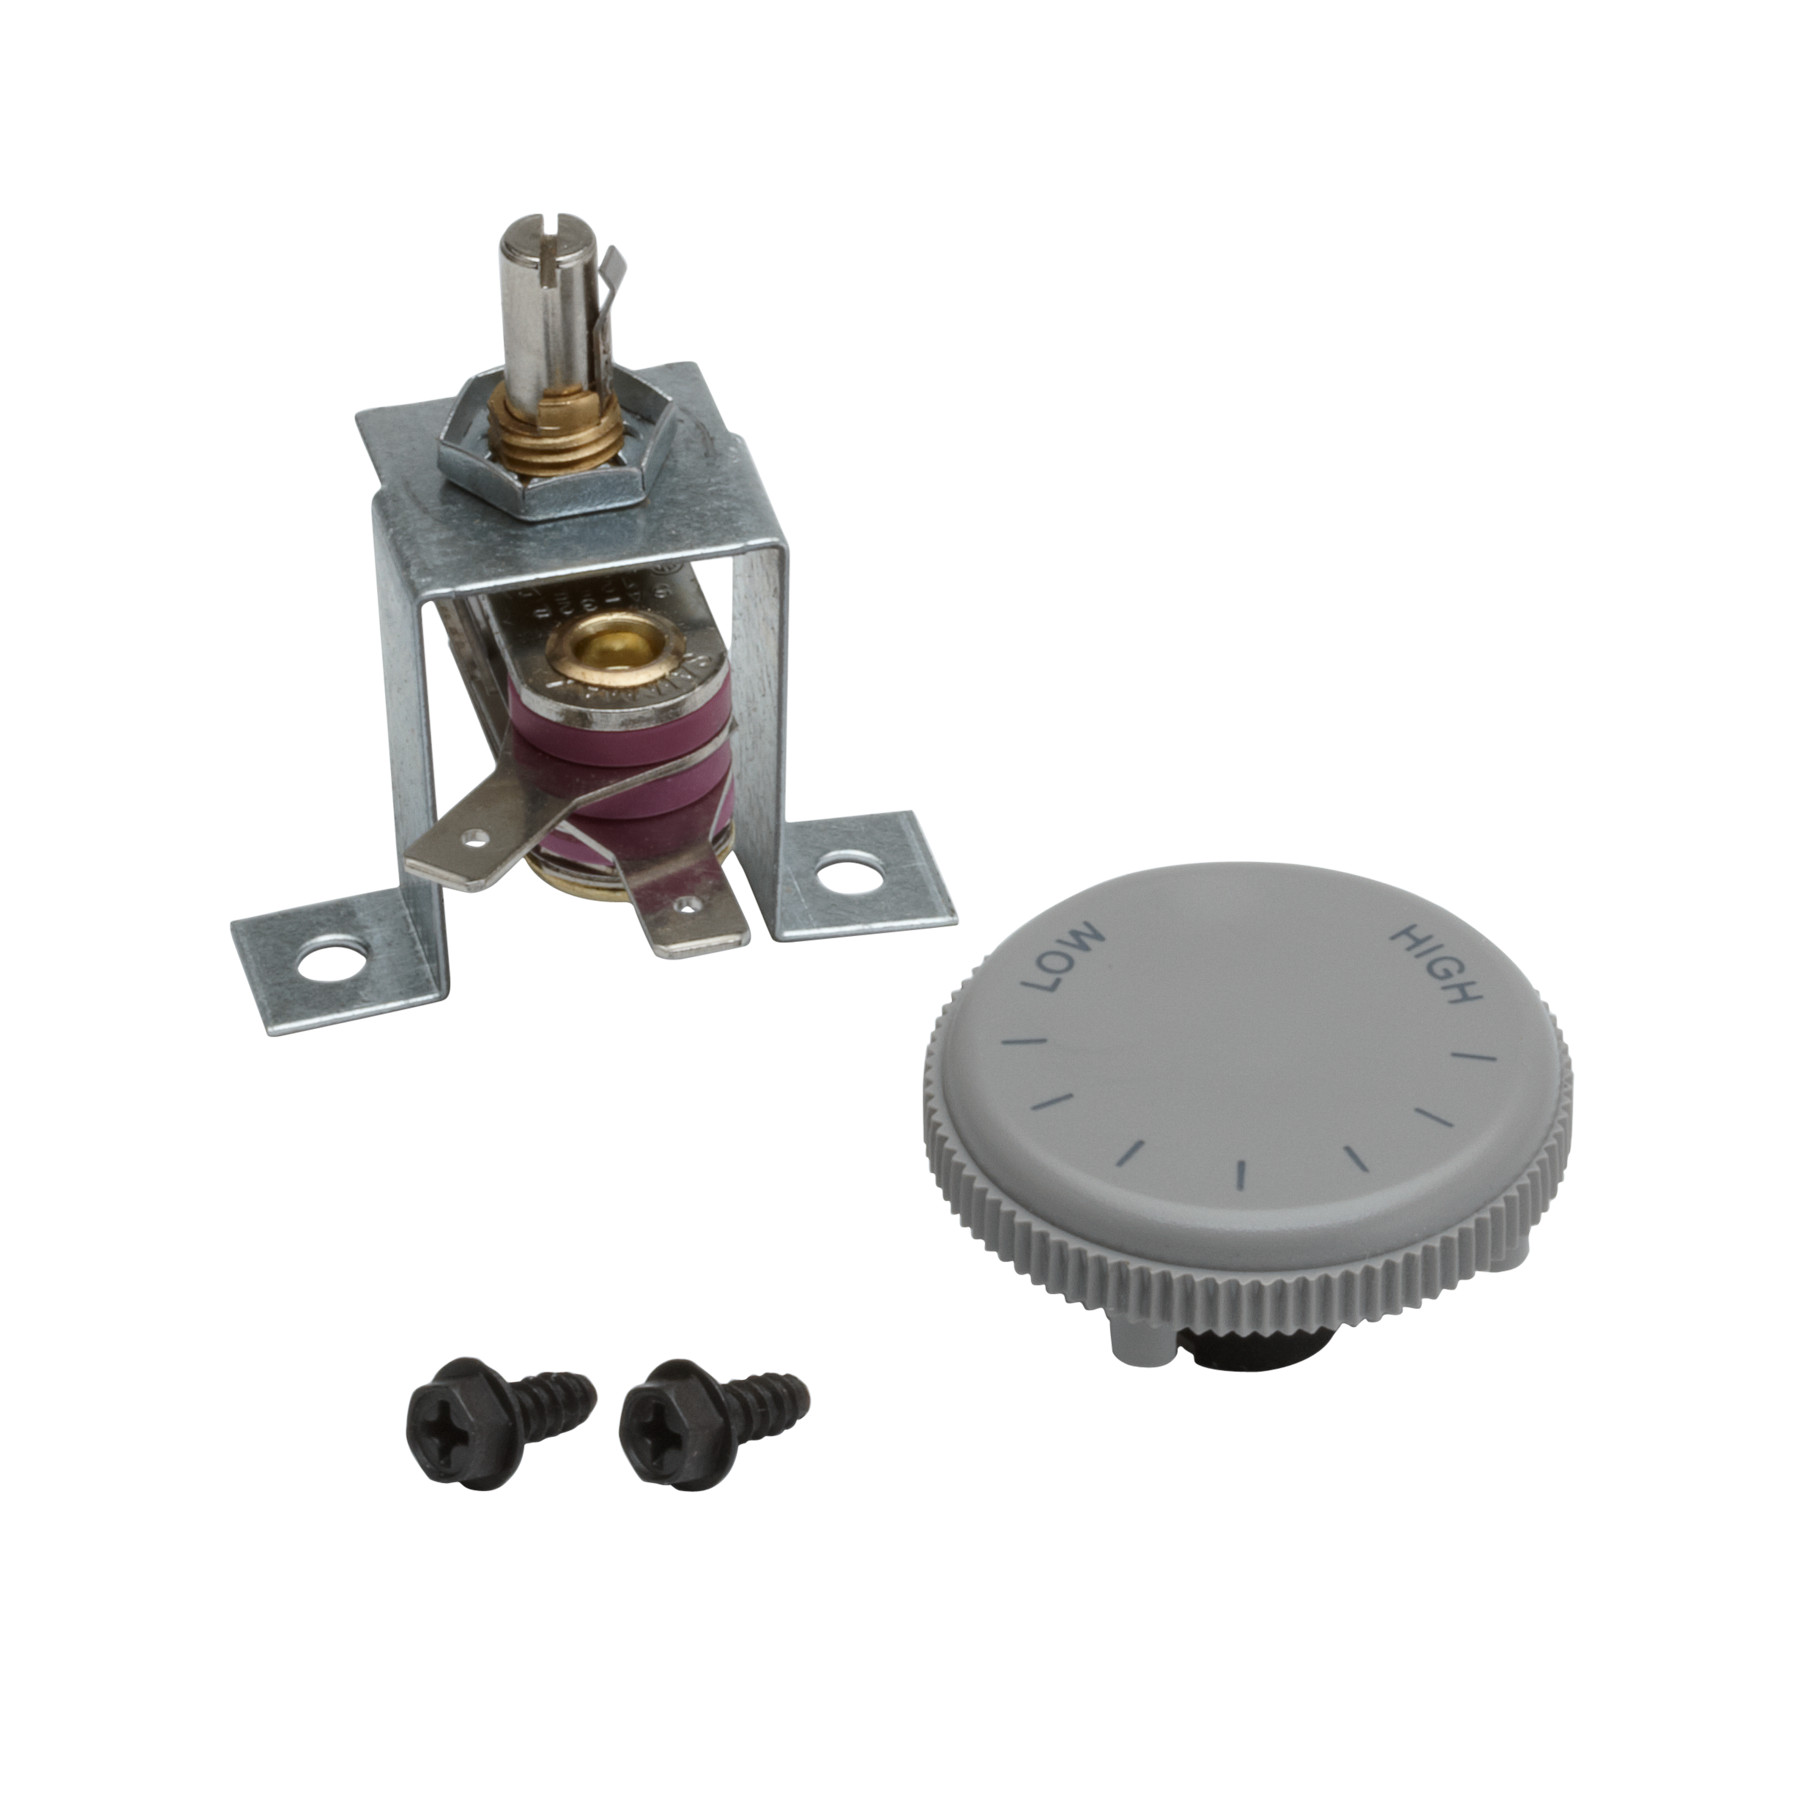 Broan® Thermostat Kit. Rated 120/240VAC, 12.5 amps. Temperature range 40° – 125° F